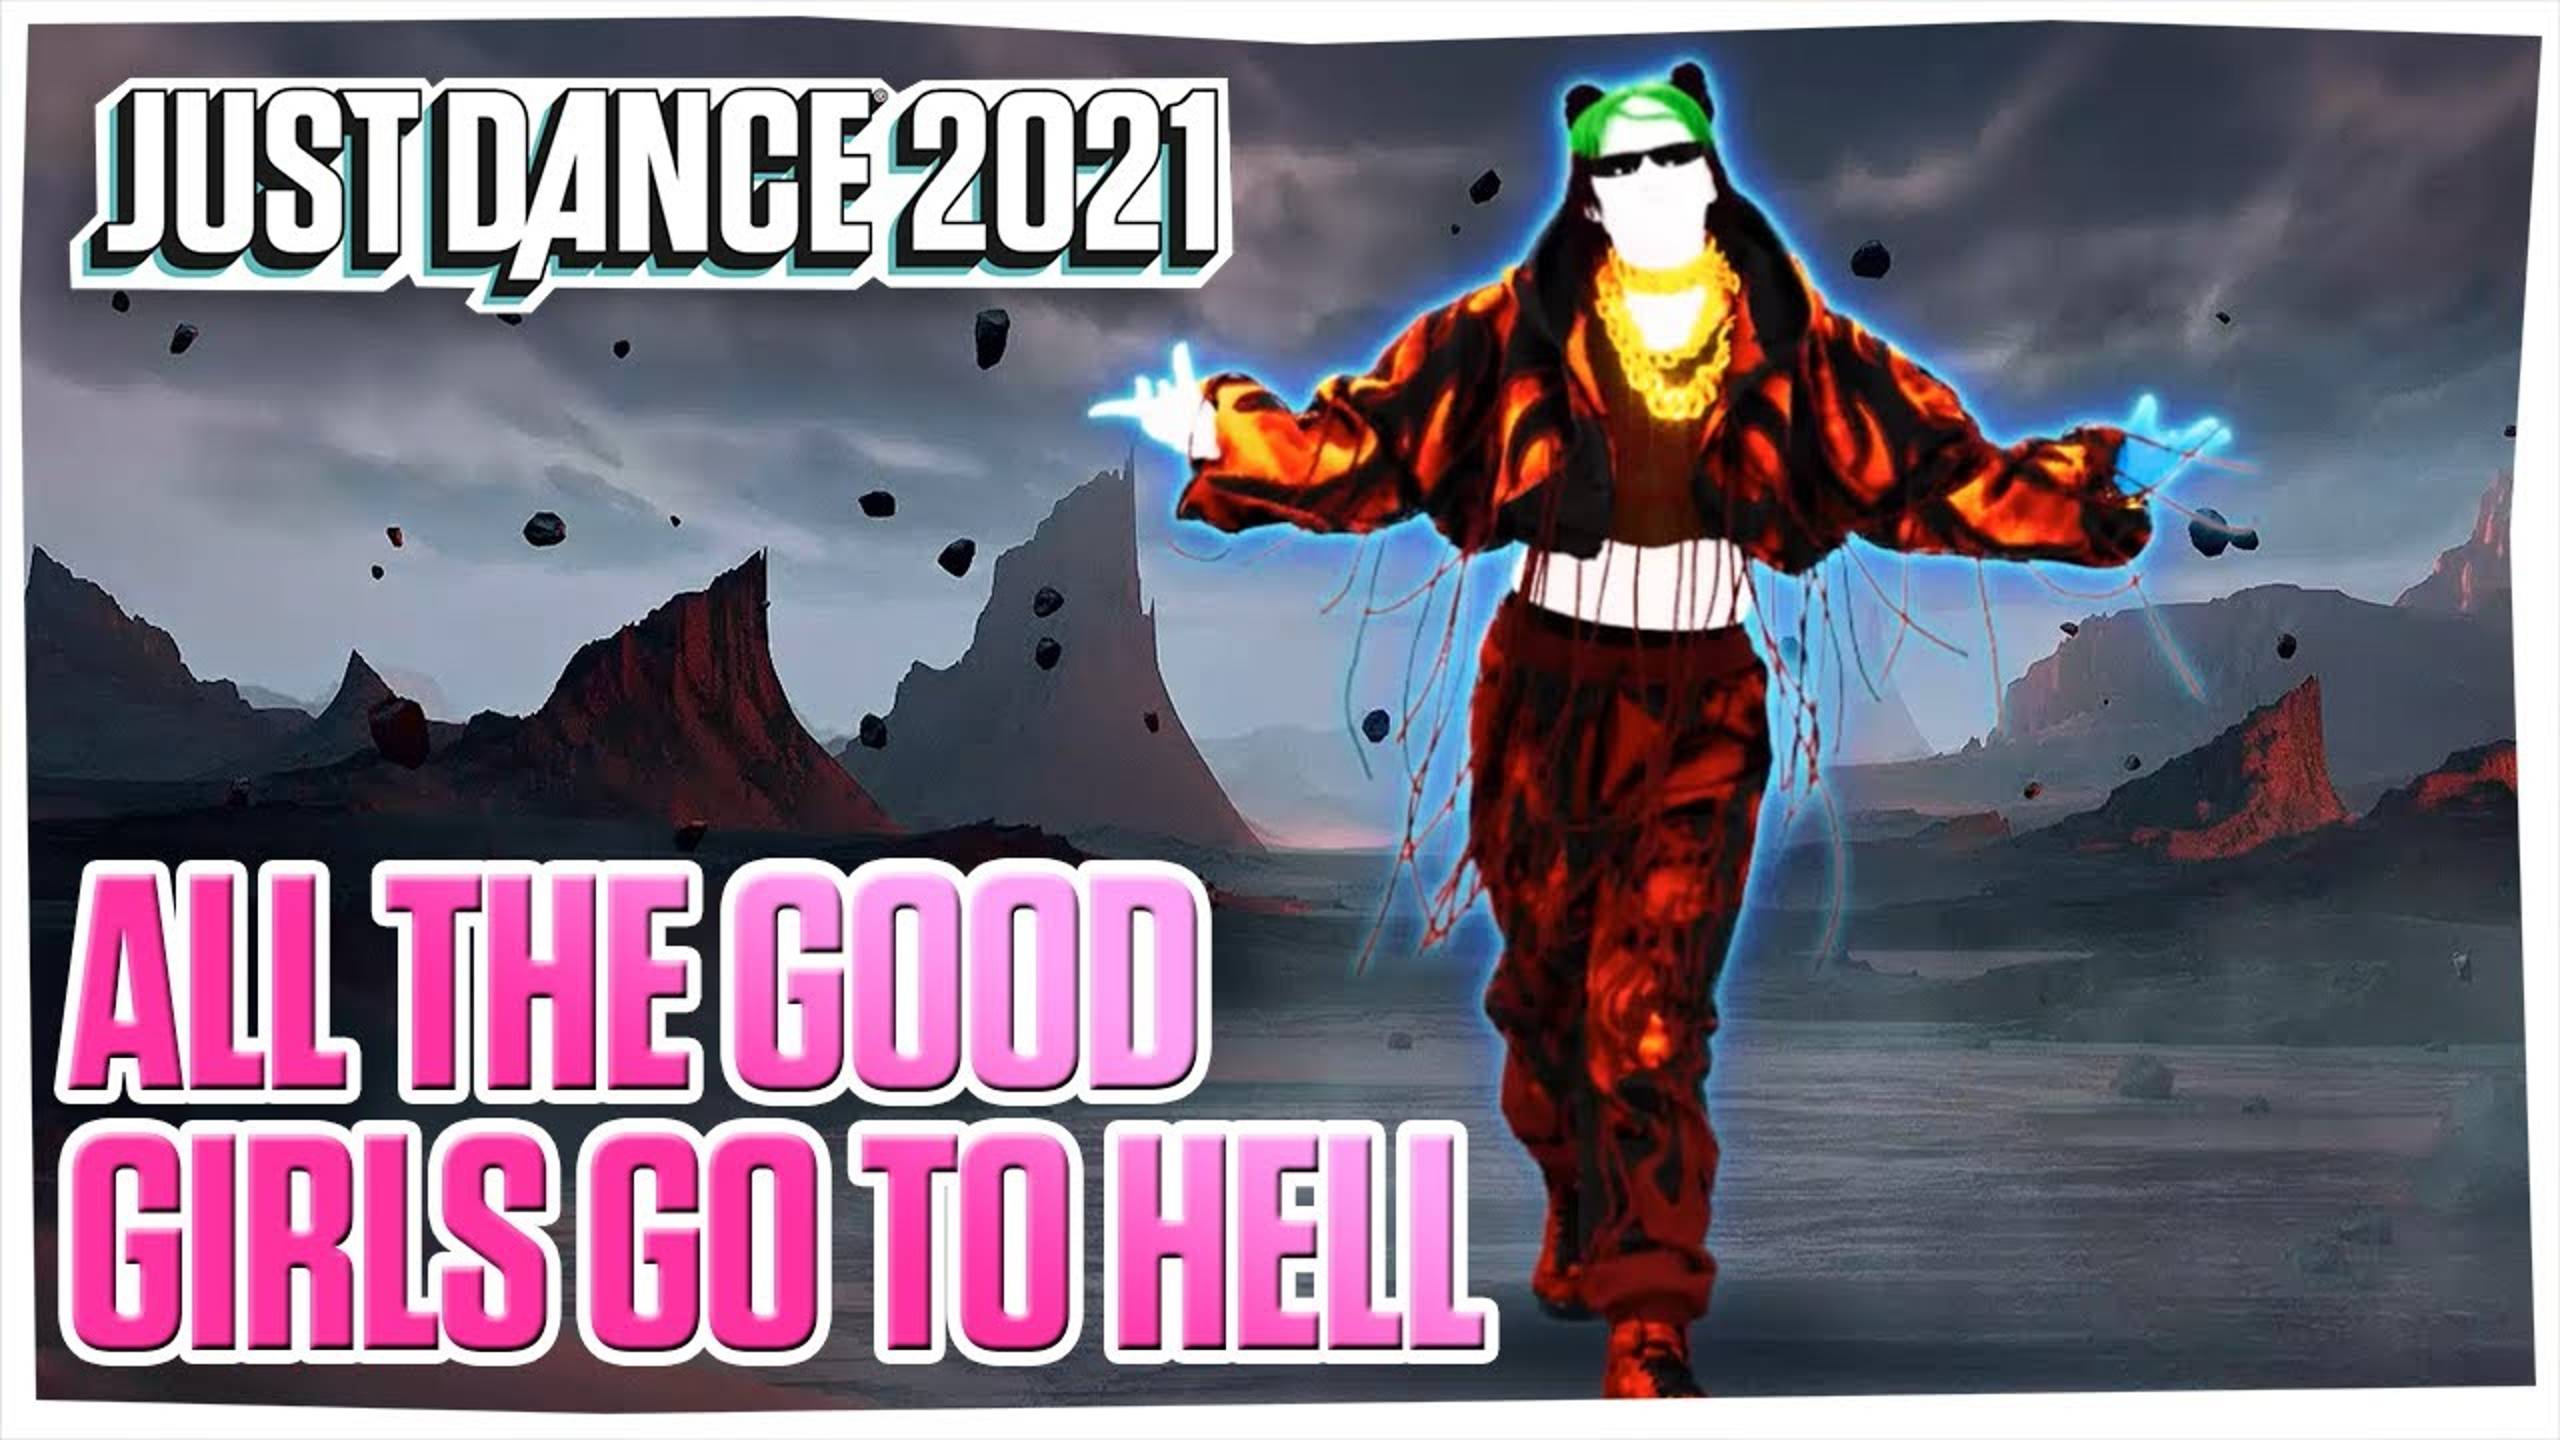 Just Dance Unlimited: all the good girls go to hell by Billie Eilish